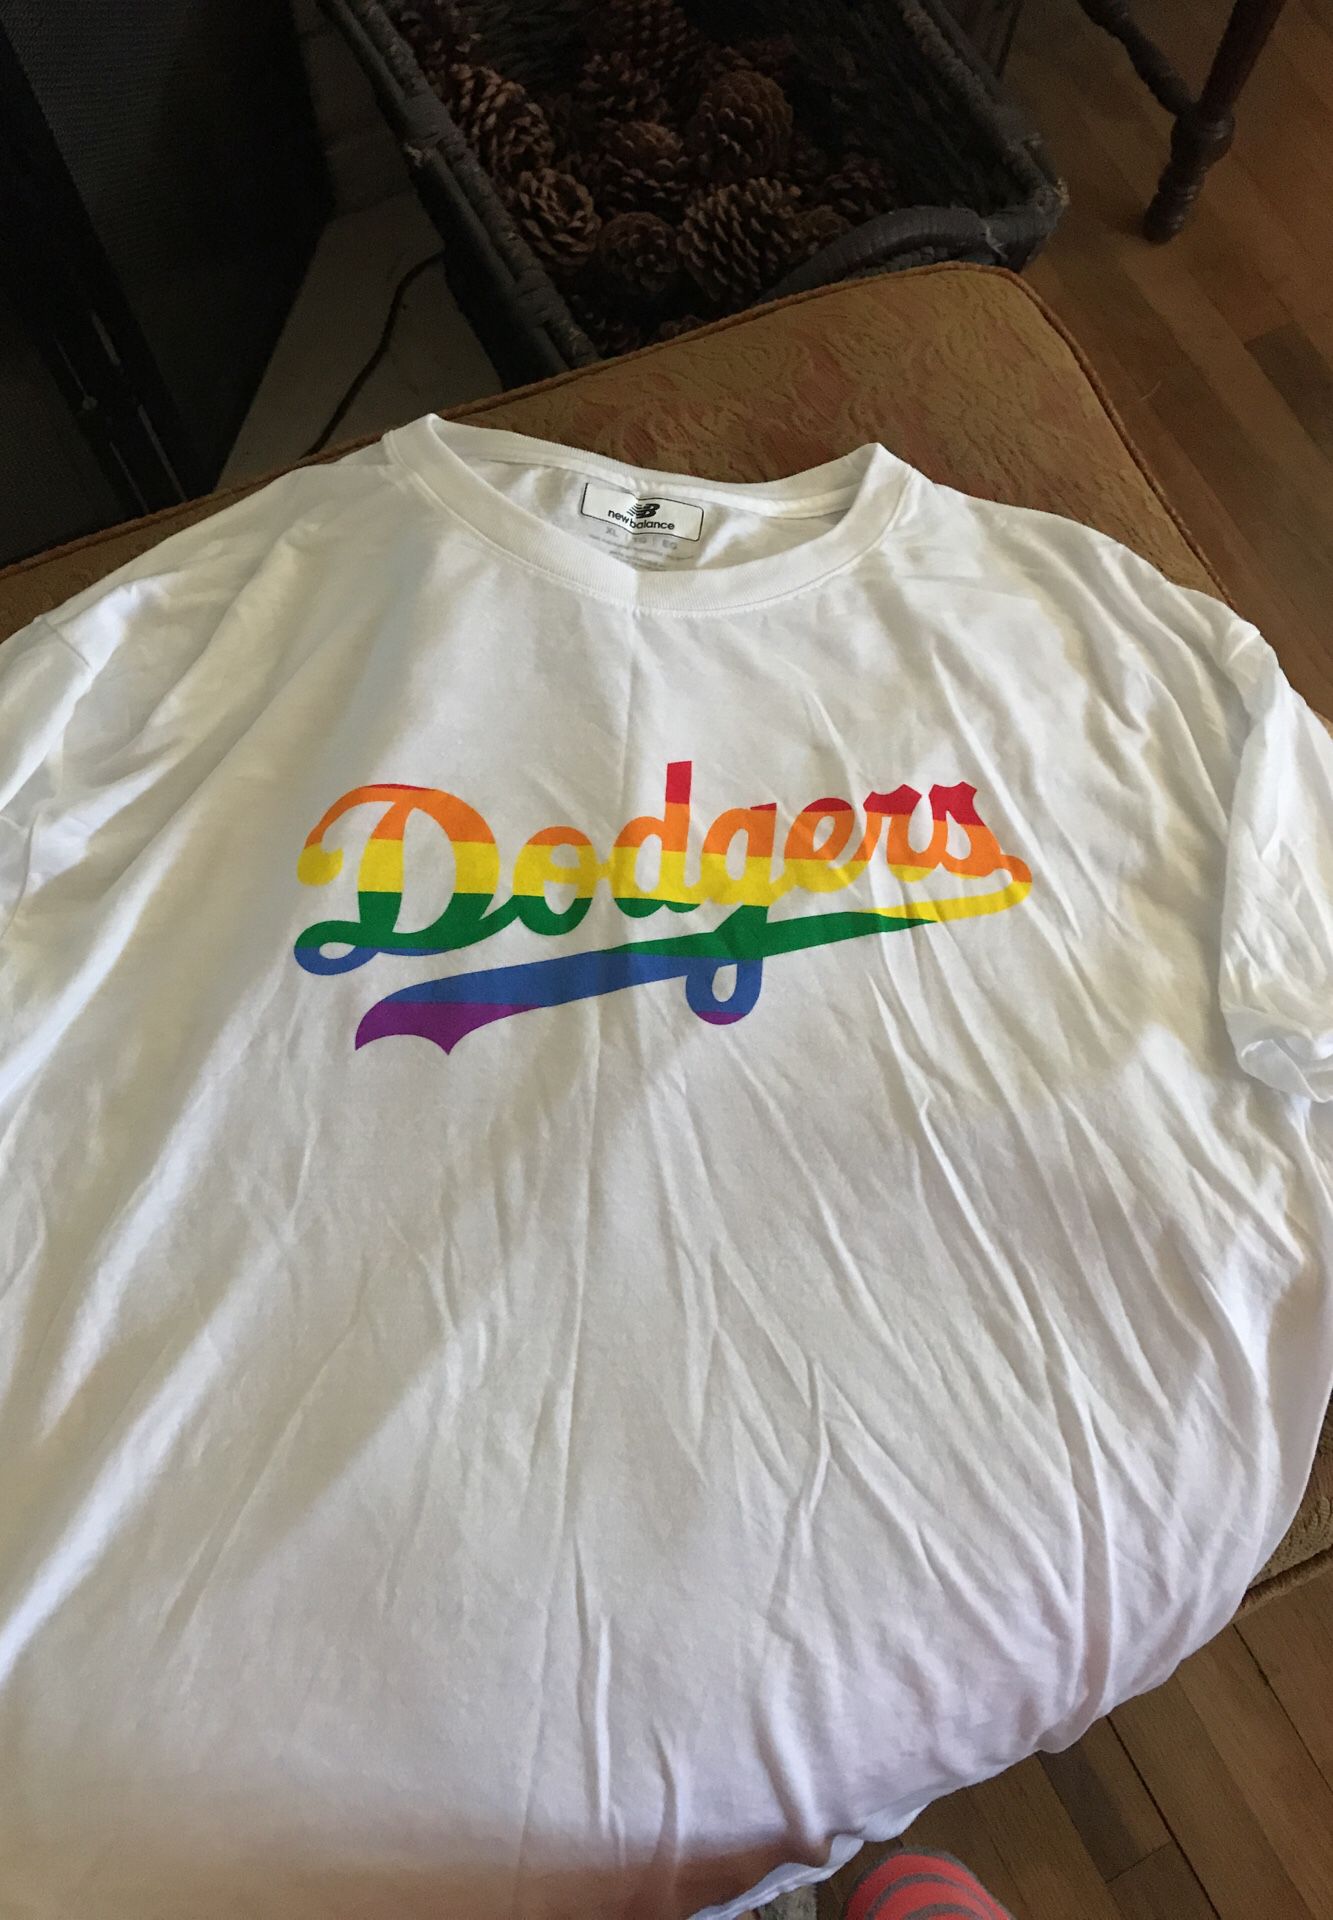 Dodgers Rainbow LGBT XL shirt for Sale in Covina, CA - OfferUp